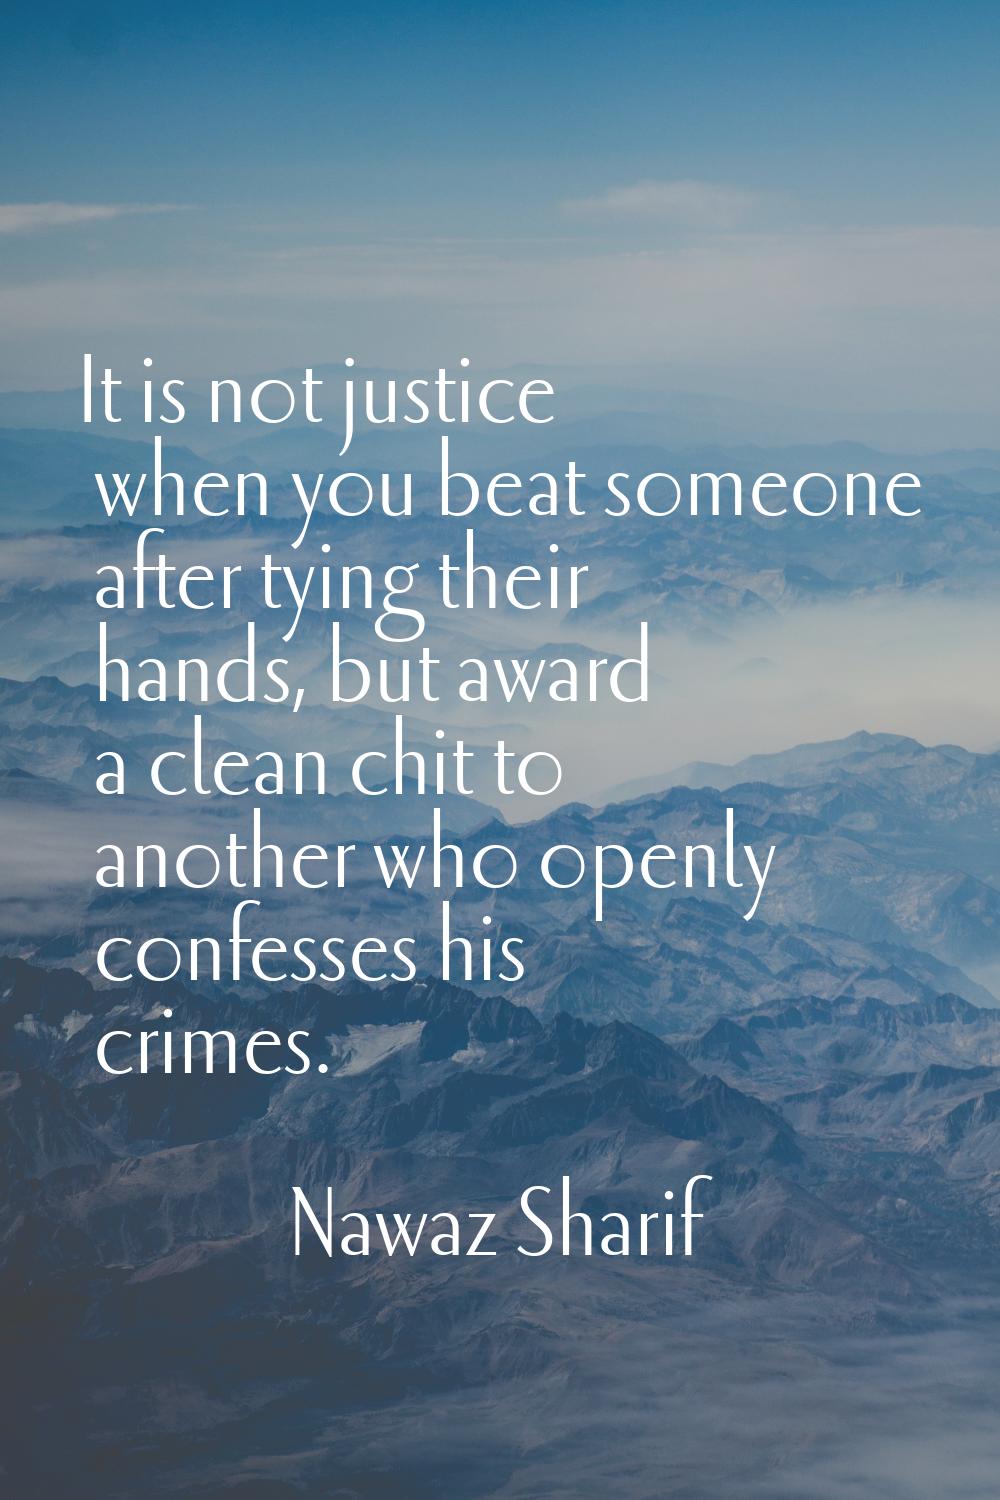 It is not justice when you beat someone after tying their hands, but award a clean chit to another 